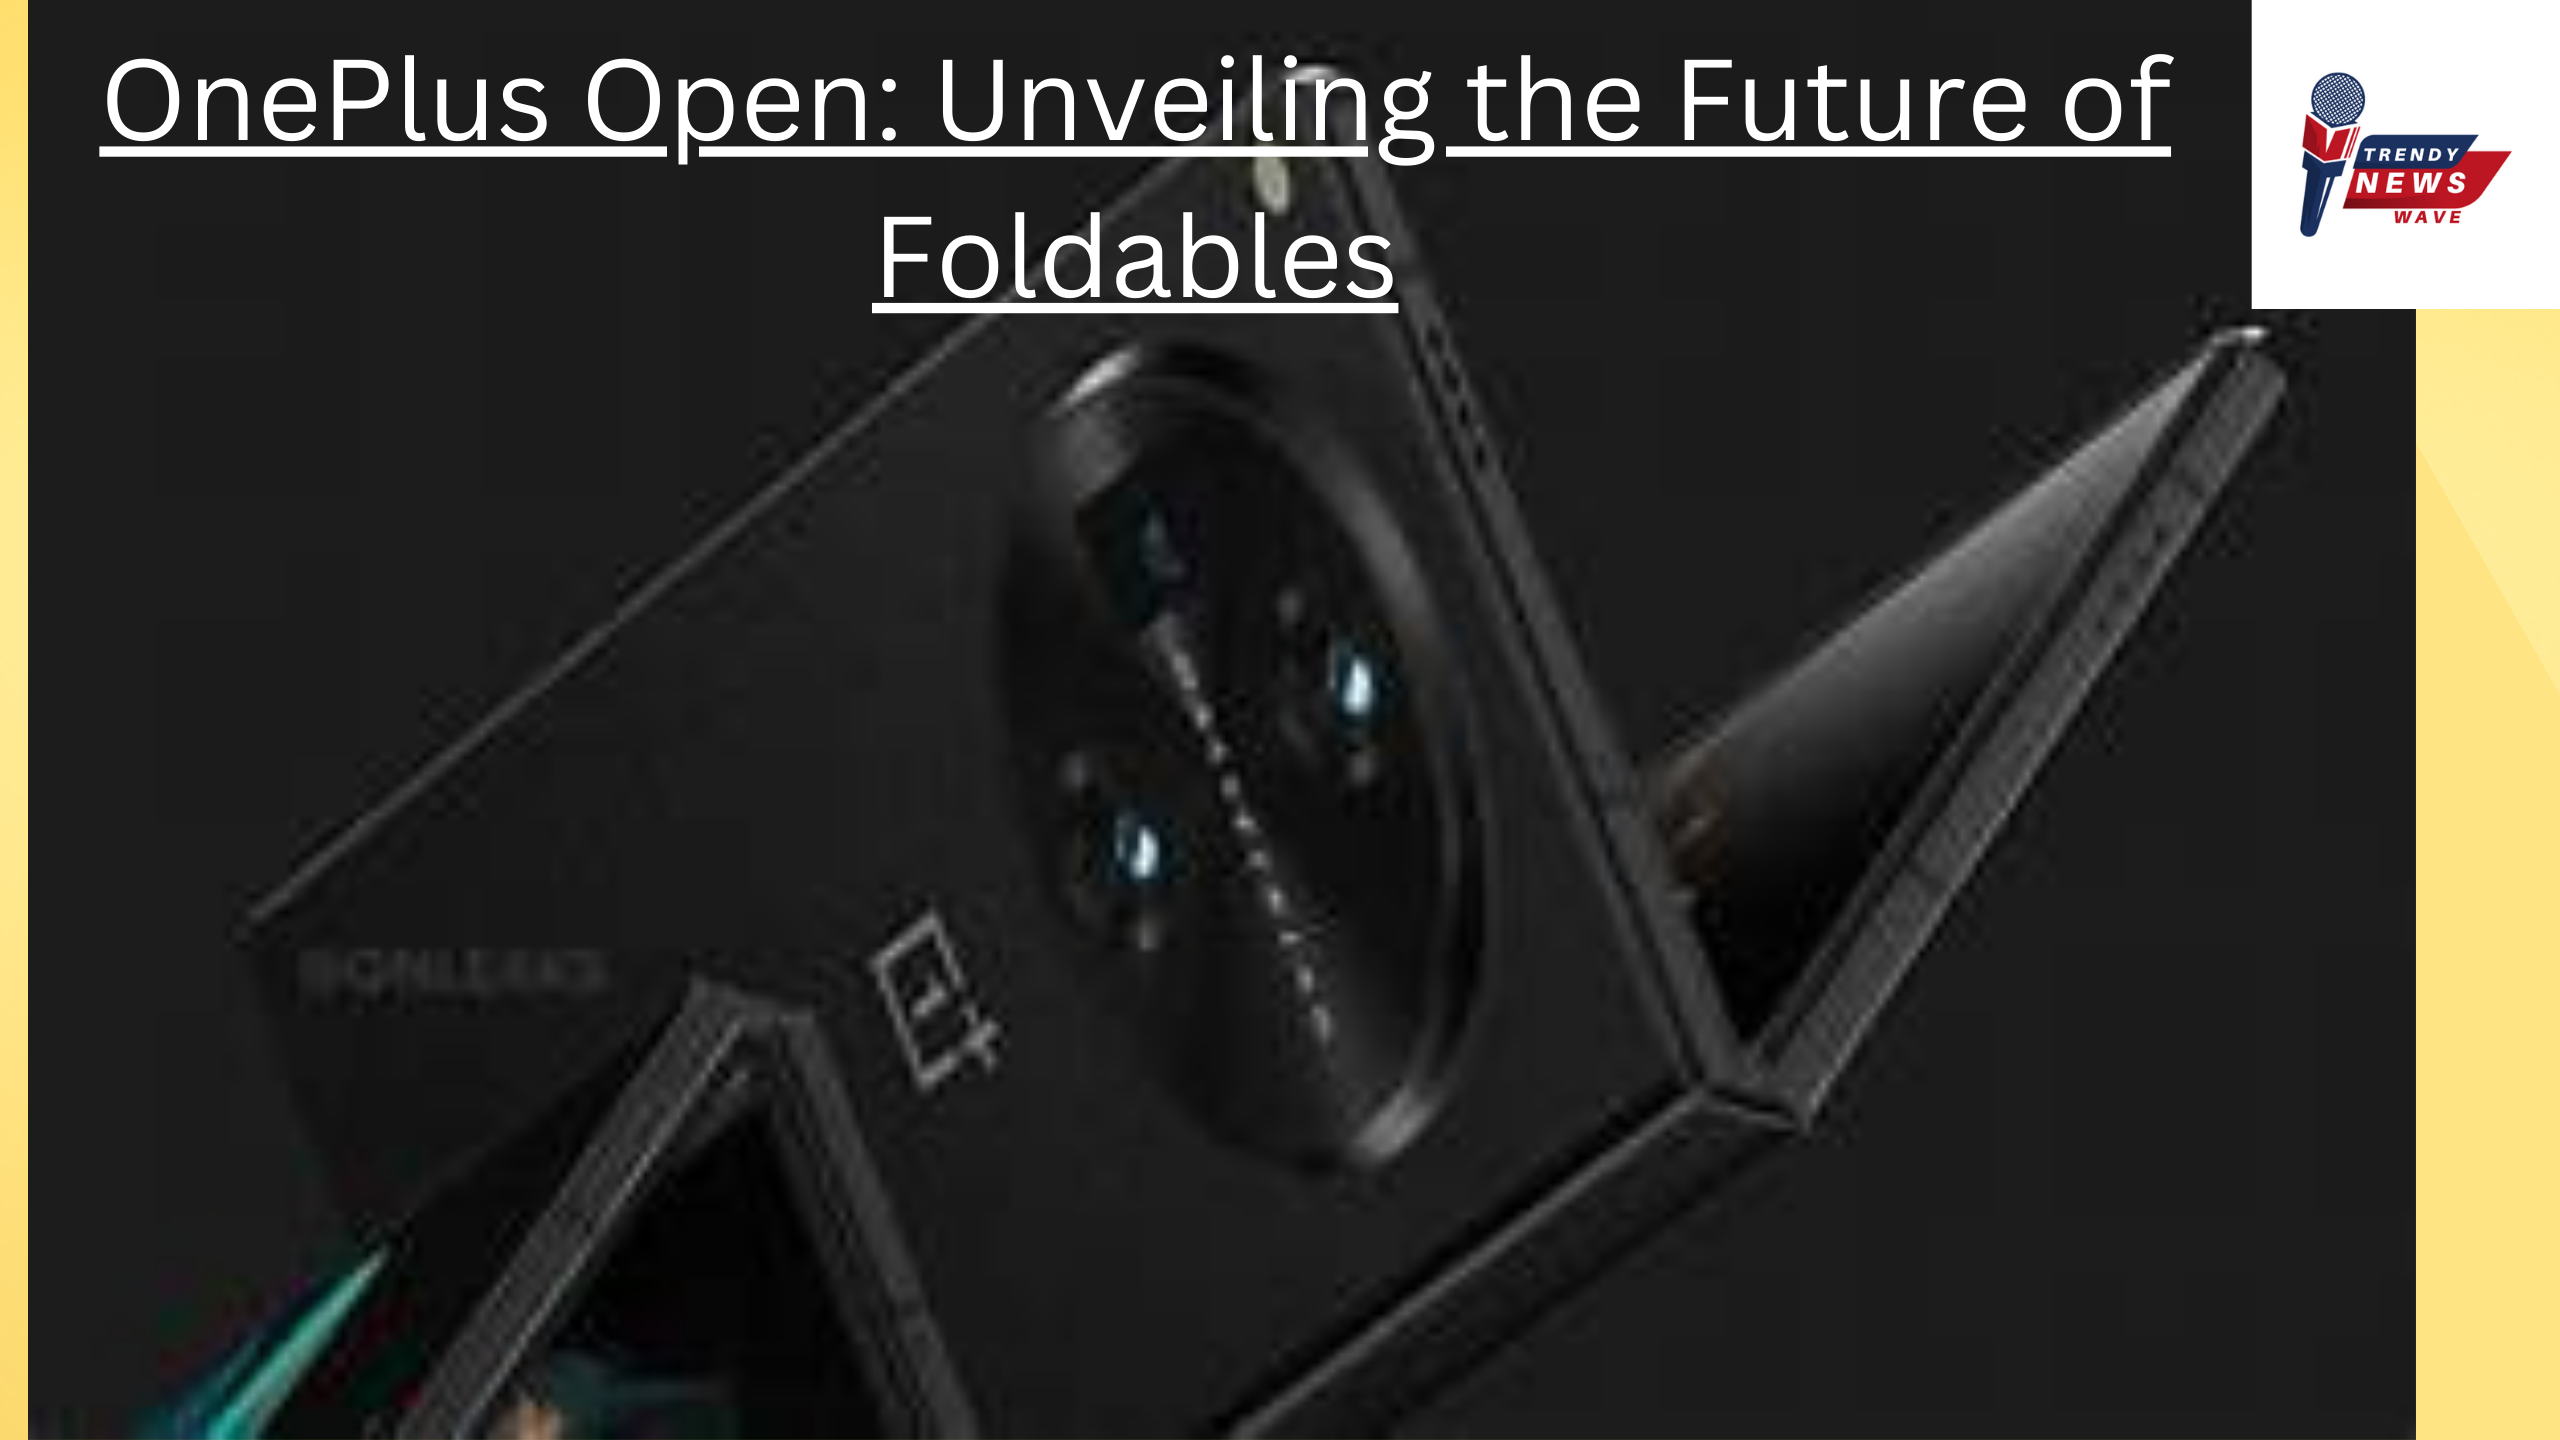 OnePlus Open: Unveiling the Future of Foldables